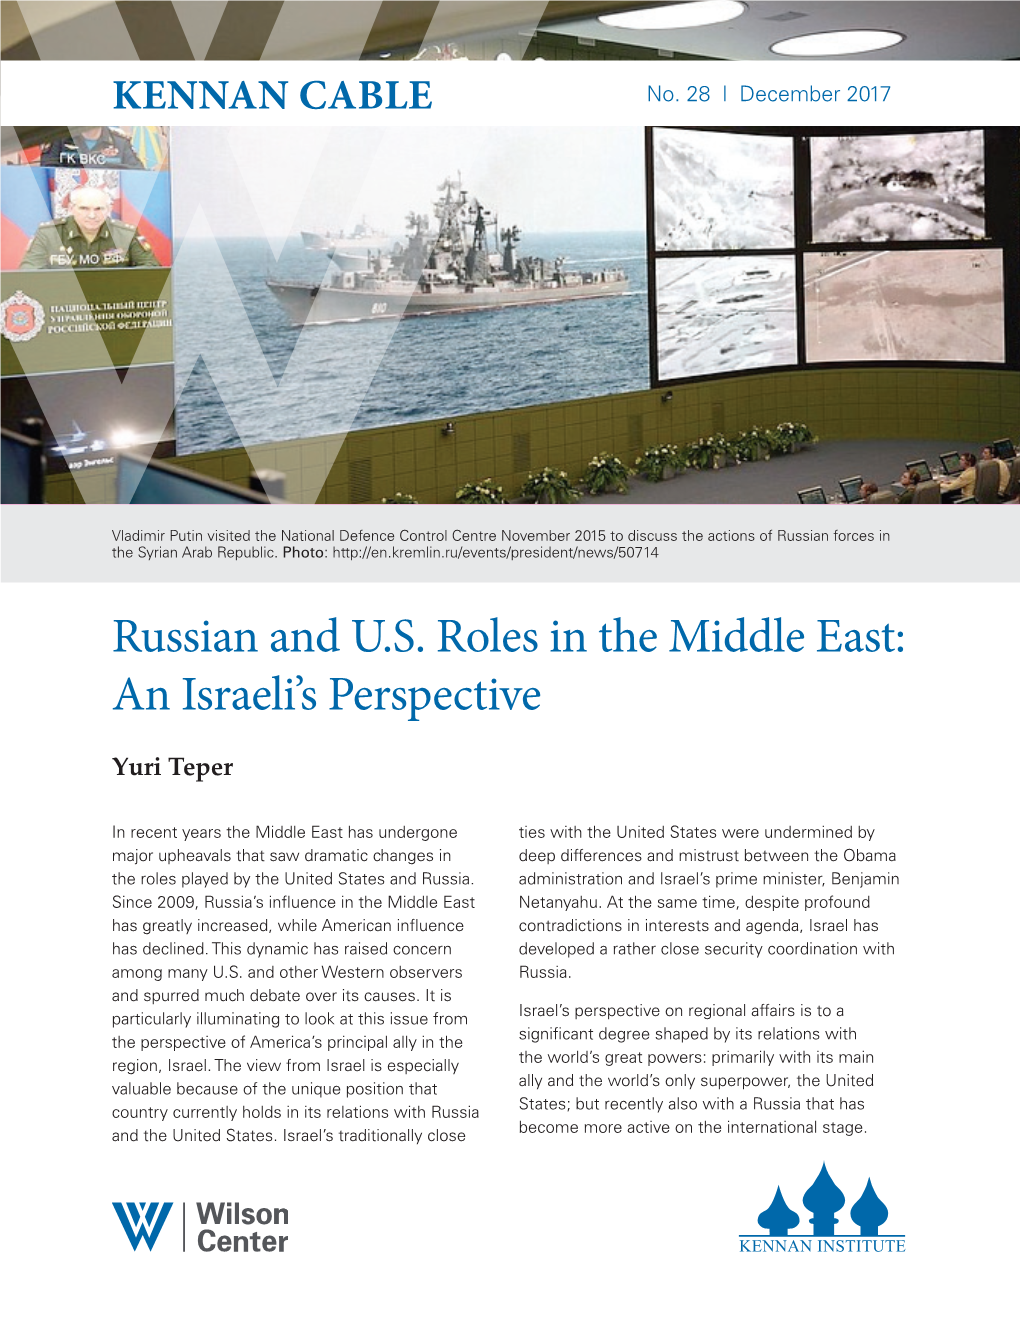 Russian and U.S. Roles in the Middle East: an Israeli's Perspective